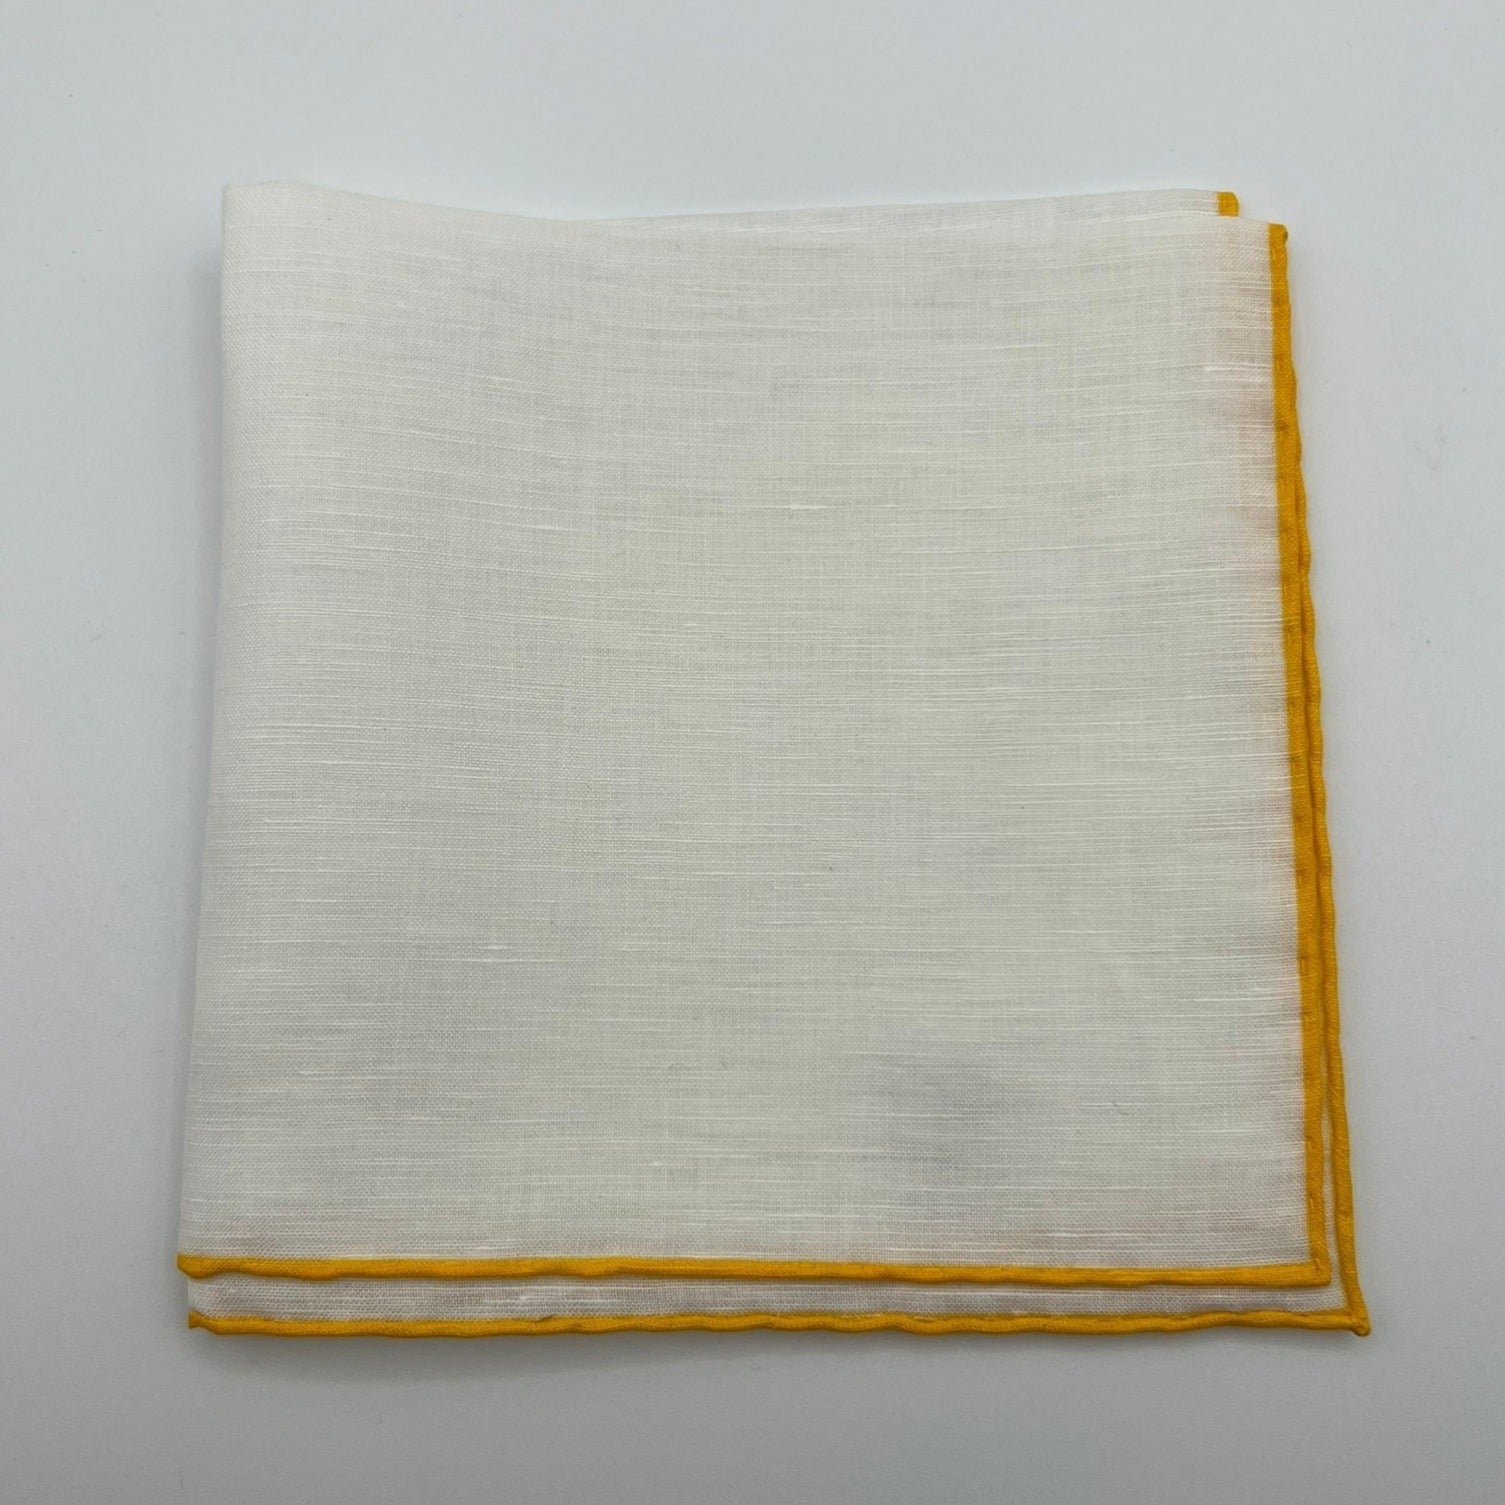 Cruciani & Bella 60%Linen 40% Cotton Hand-rolled  -  Pocket Square White and Yellow Handmade in Italy 33 cm X 33 cm #7512